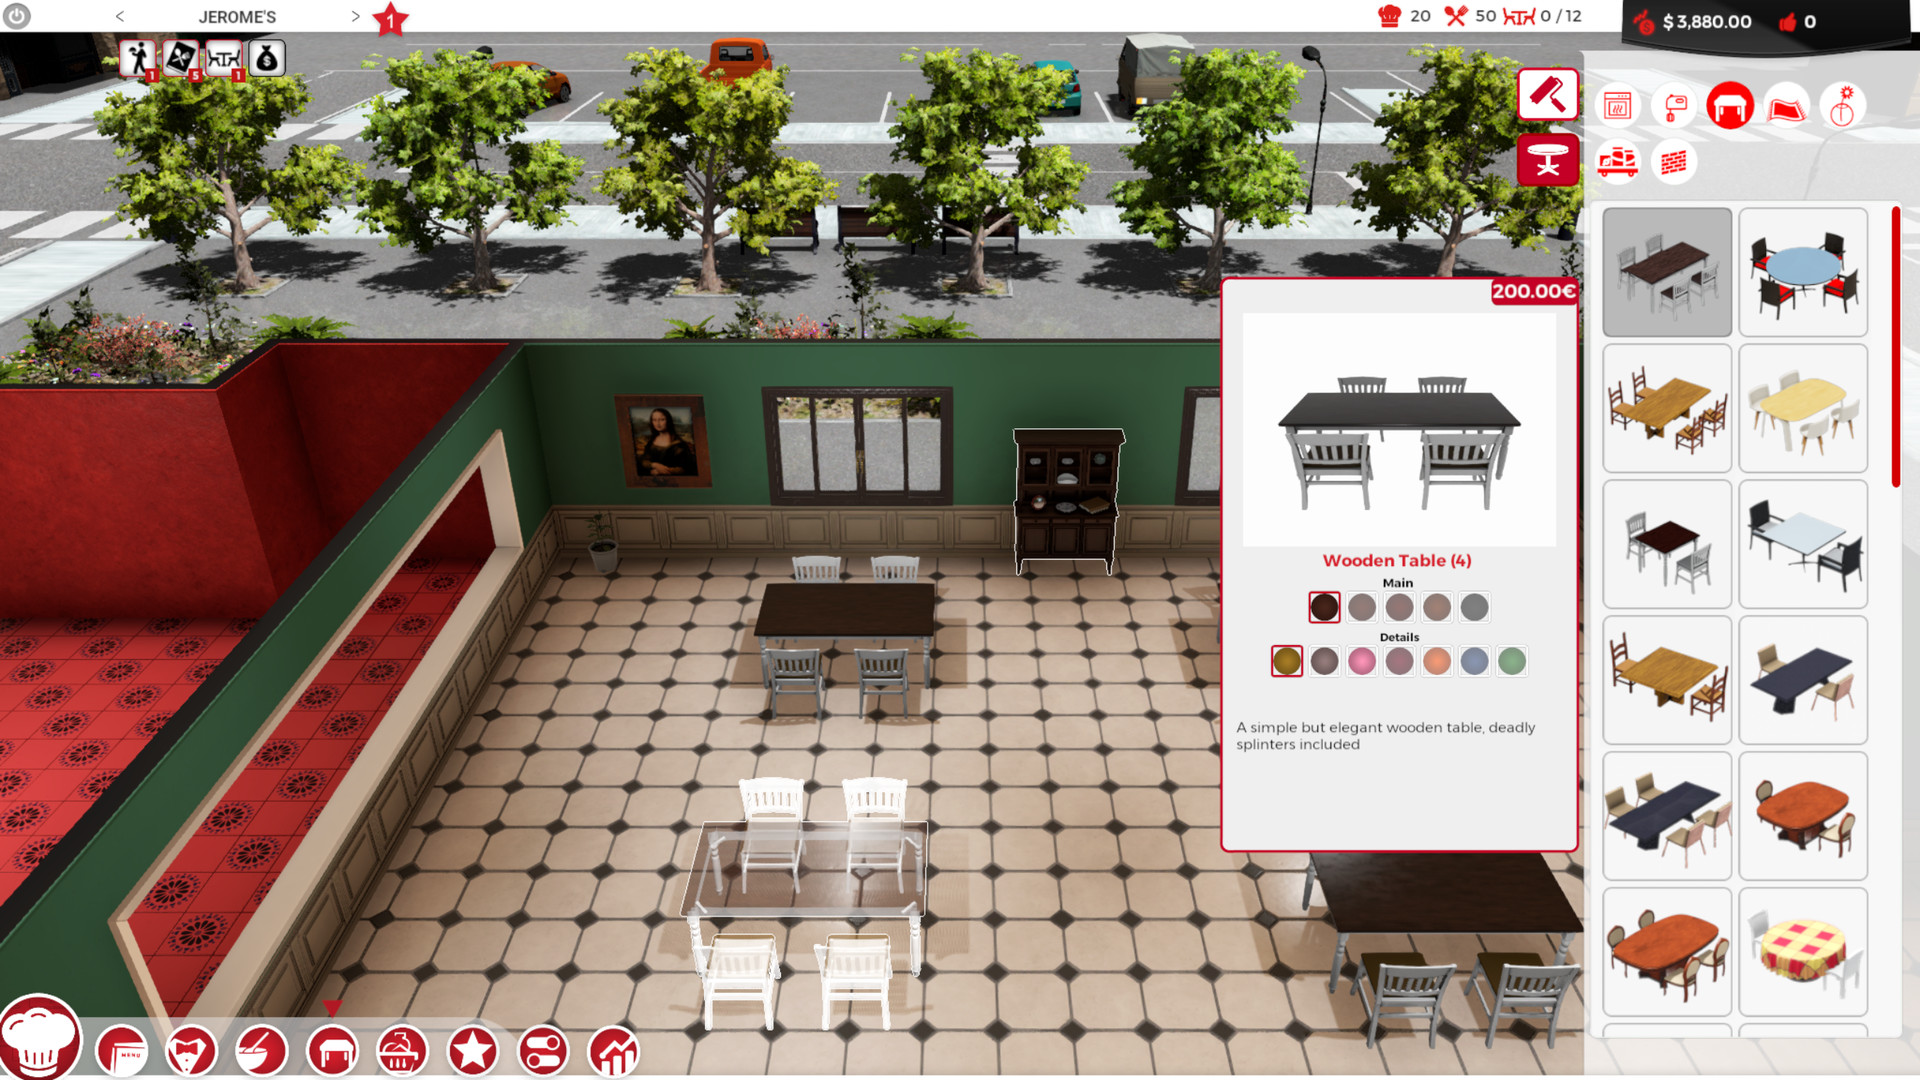 How To Rotate Furniture In Roblox Restaurant Tycoon 2